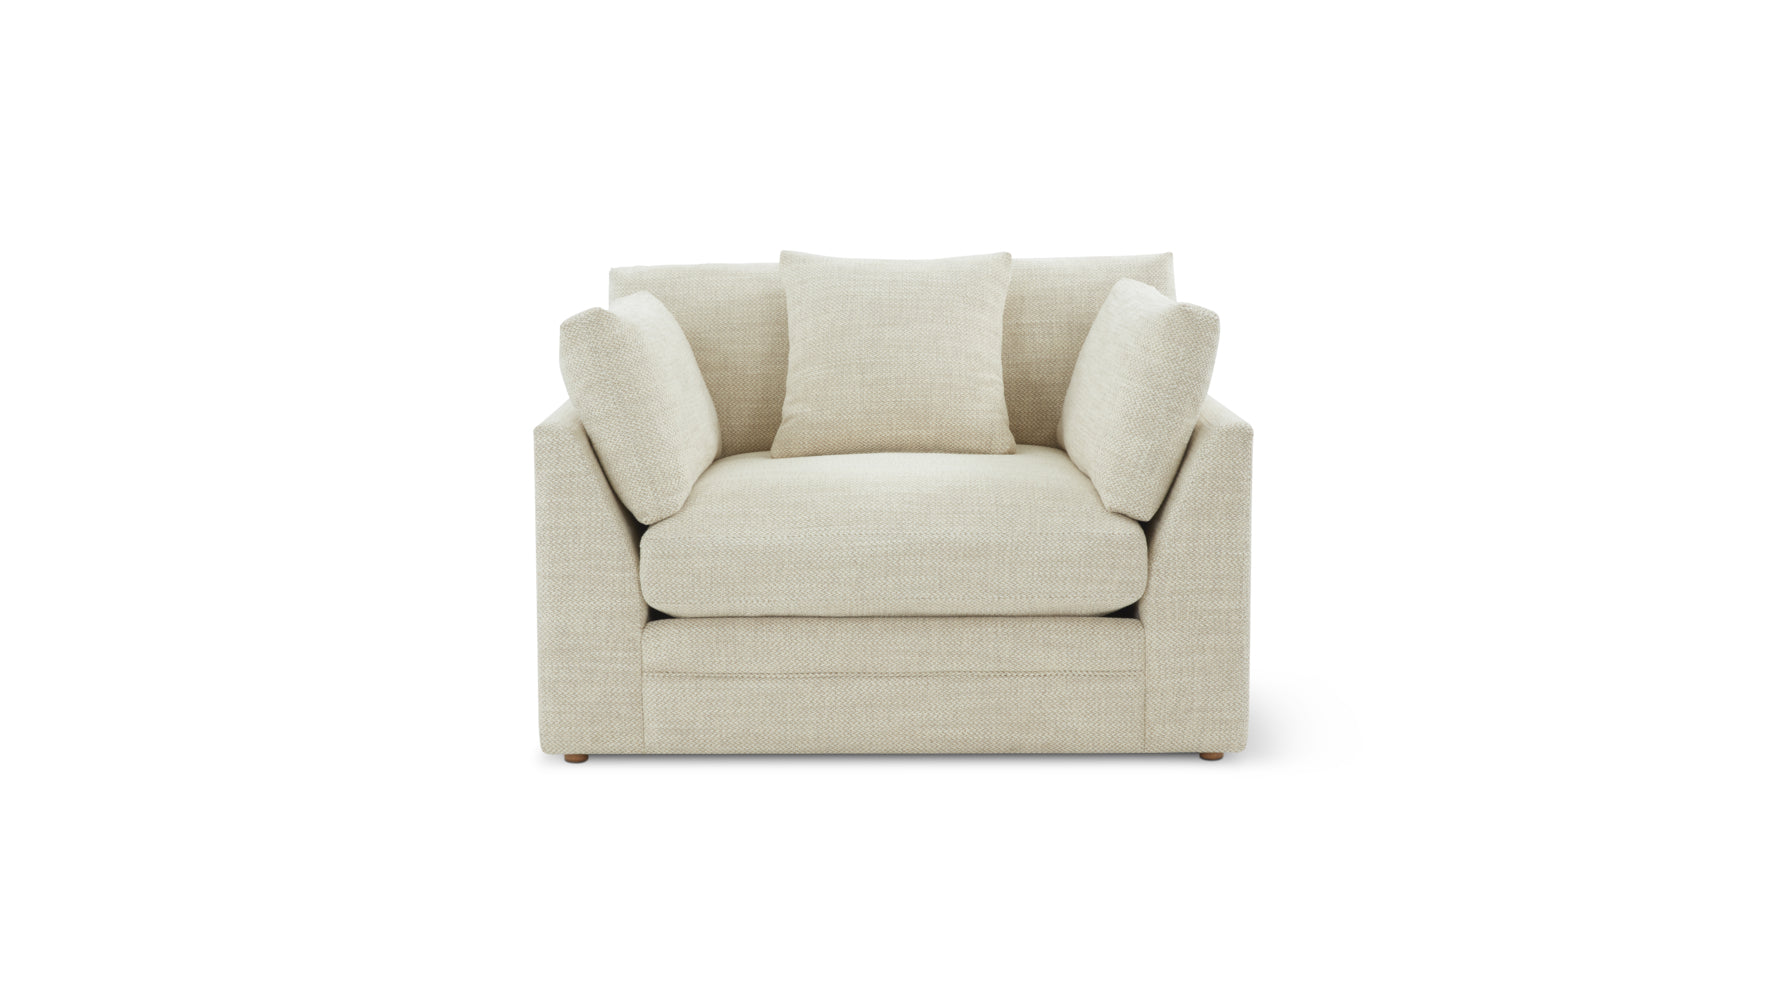 Feel Good Club Lounge Chair, Oyster - Image 1